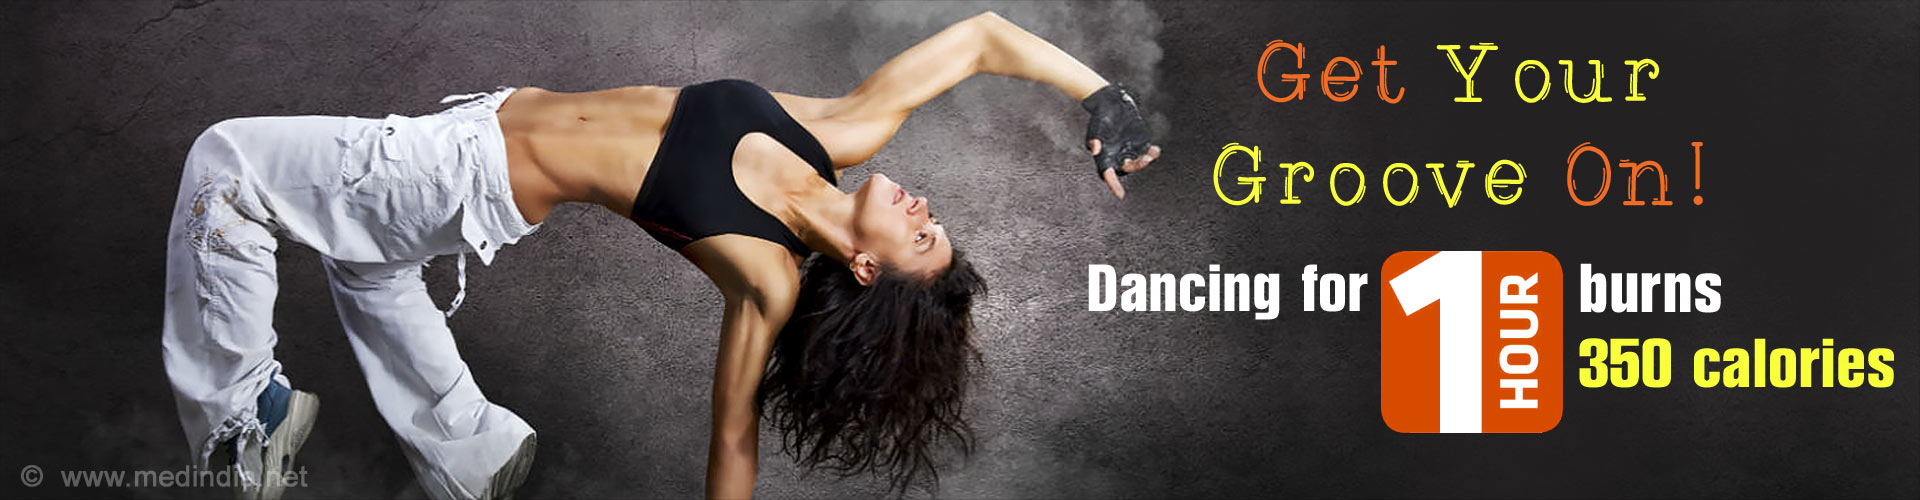 Get Your Groove On! Dancing for 1 hour burns 350 calories